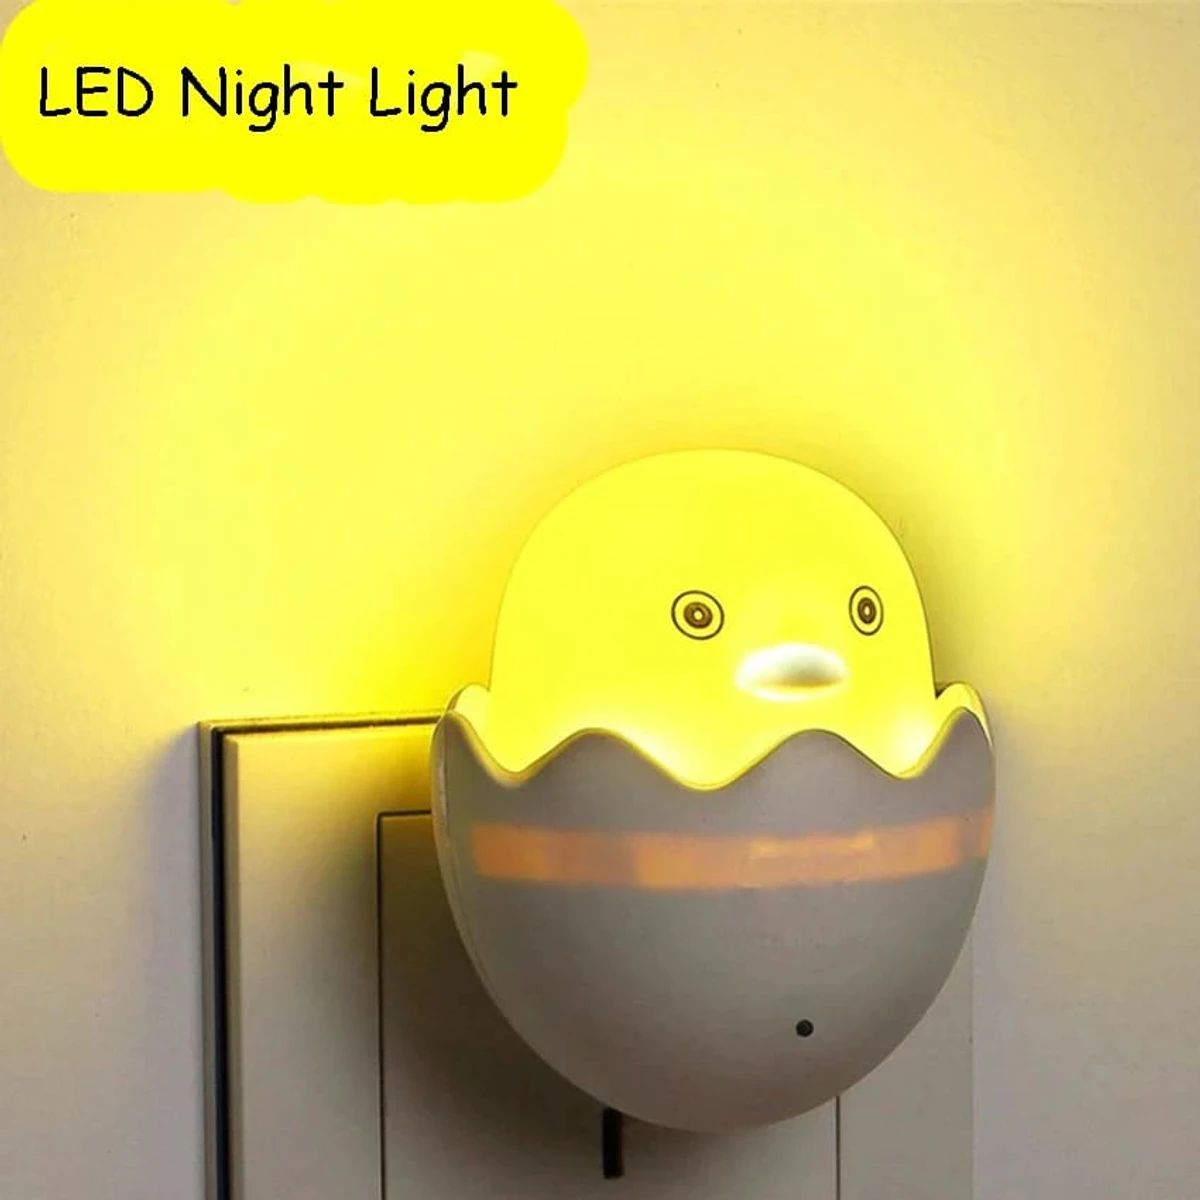 Yellow duck with egg shape led night light with Mushroom